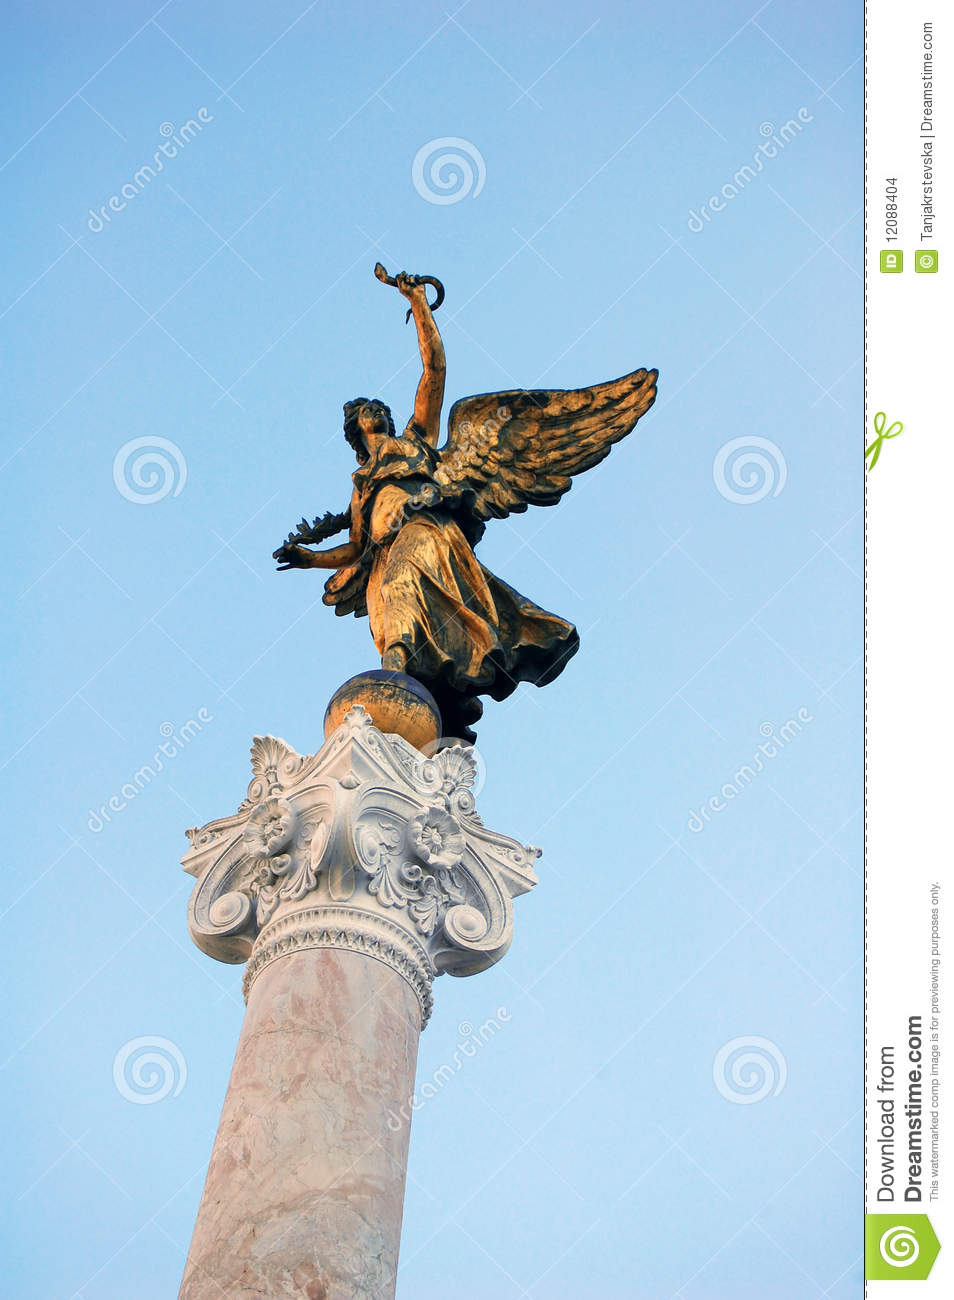 Gold Statue Of A Symbolic Peace S Angel Rome Stock Images   Image    